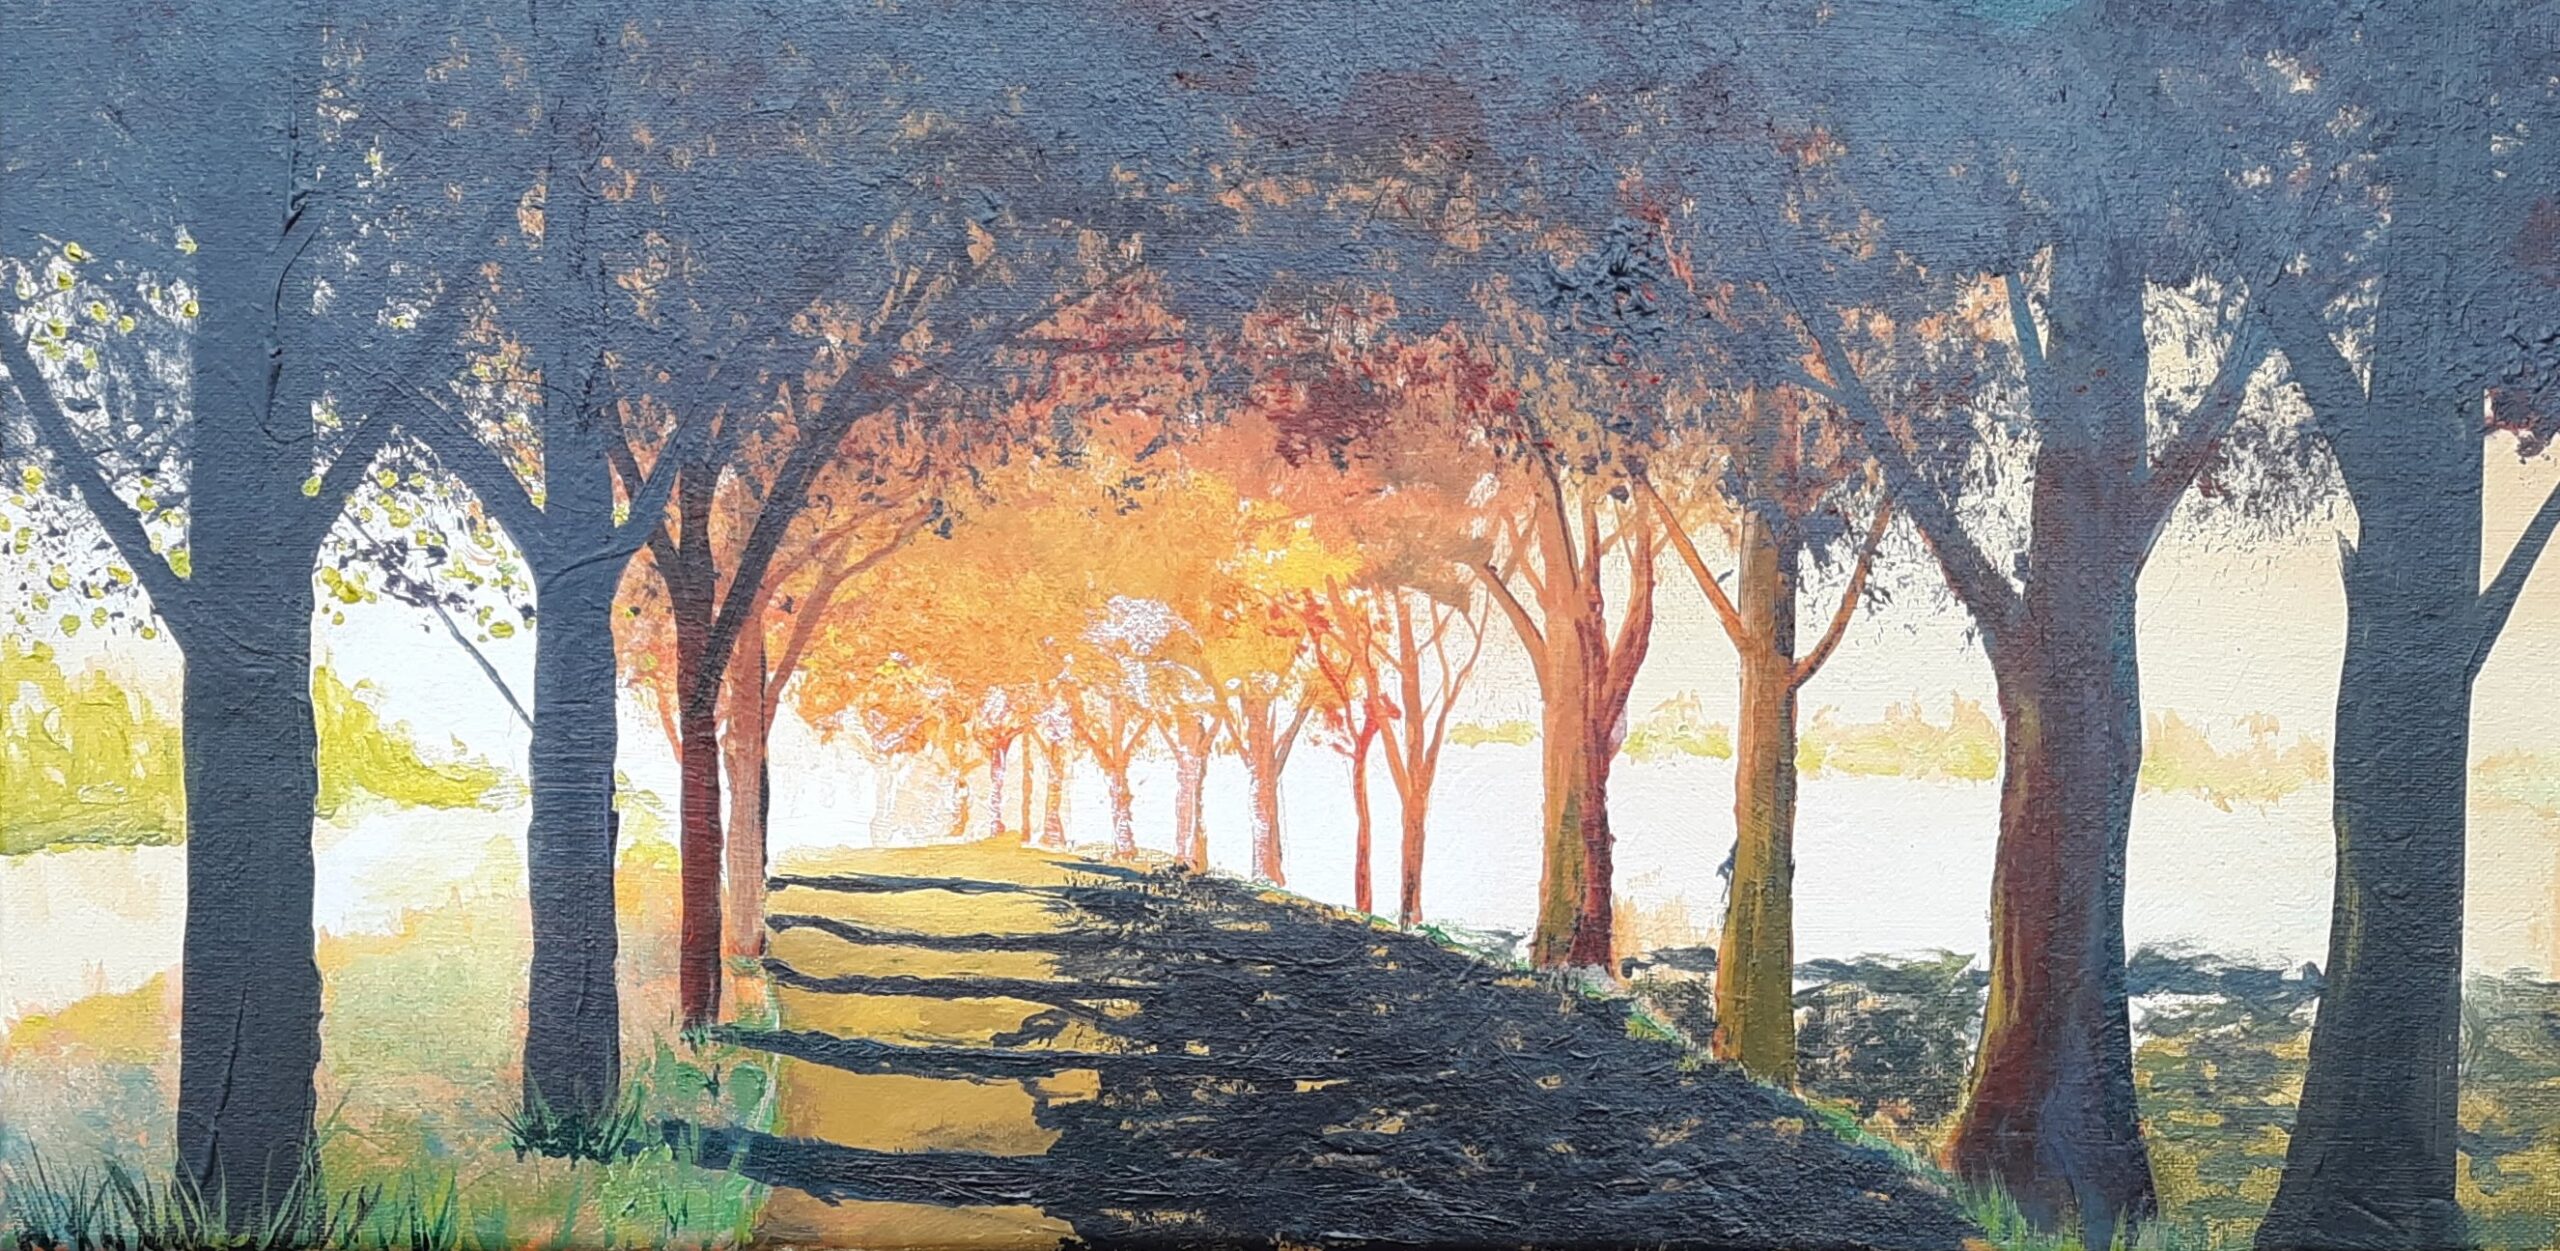 10 x 20 acrylic on canvas of a country road at sunset